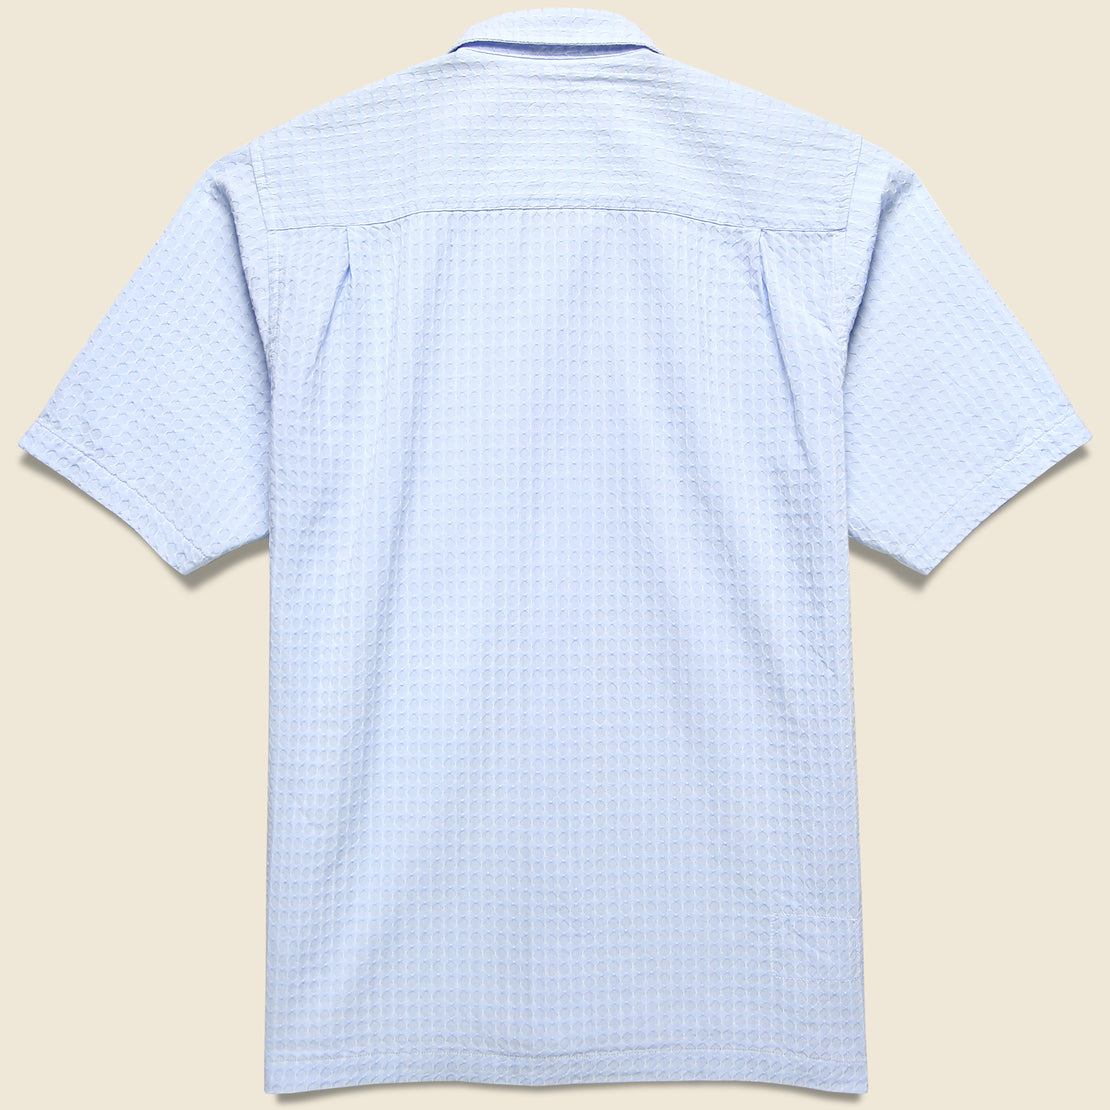 Delos Cotton Camp Shirt - Sky - Universal Works - STAG Provisions - Tops - S/S Woven - Solid